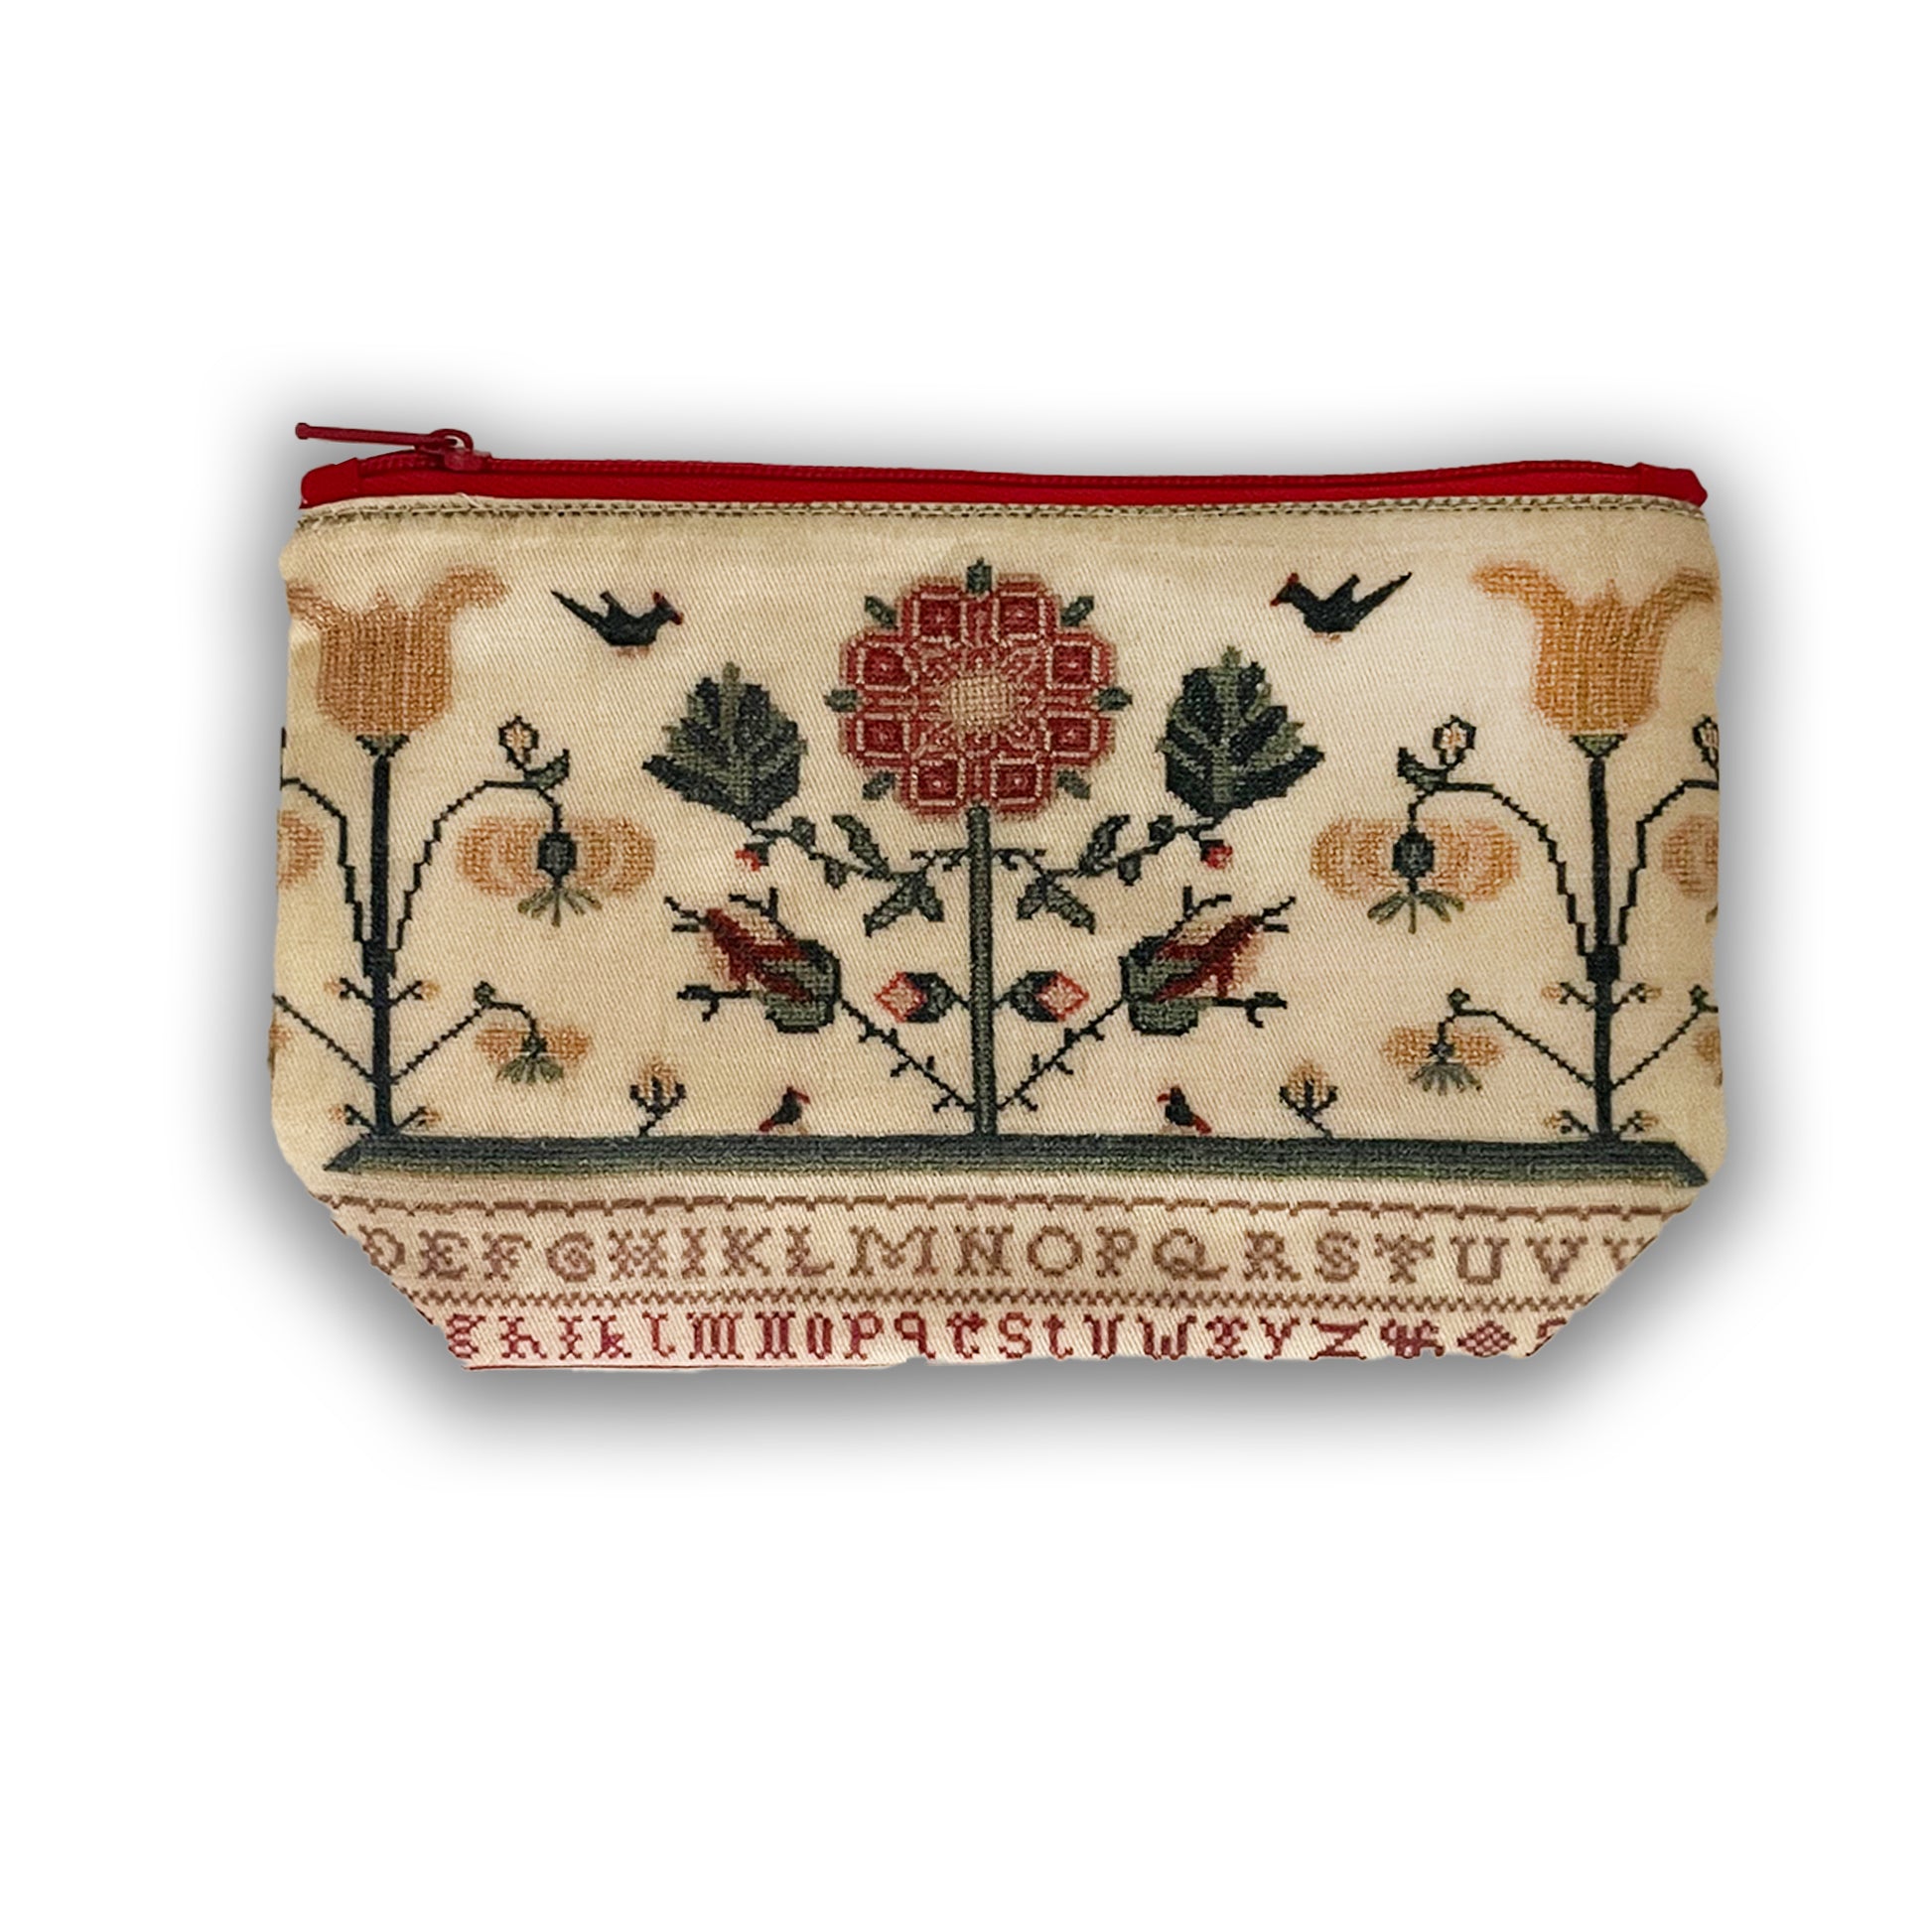 Small zipped cosmetic bag with sampler pattern and red zip.